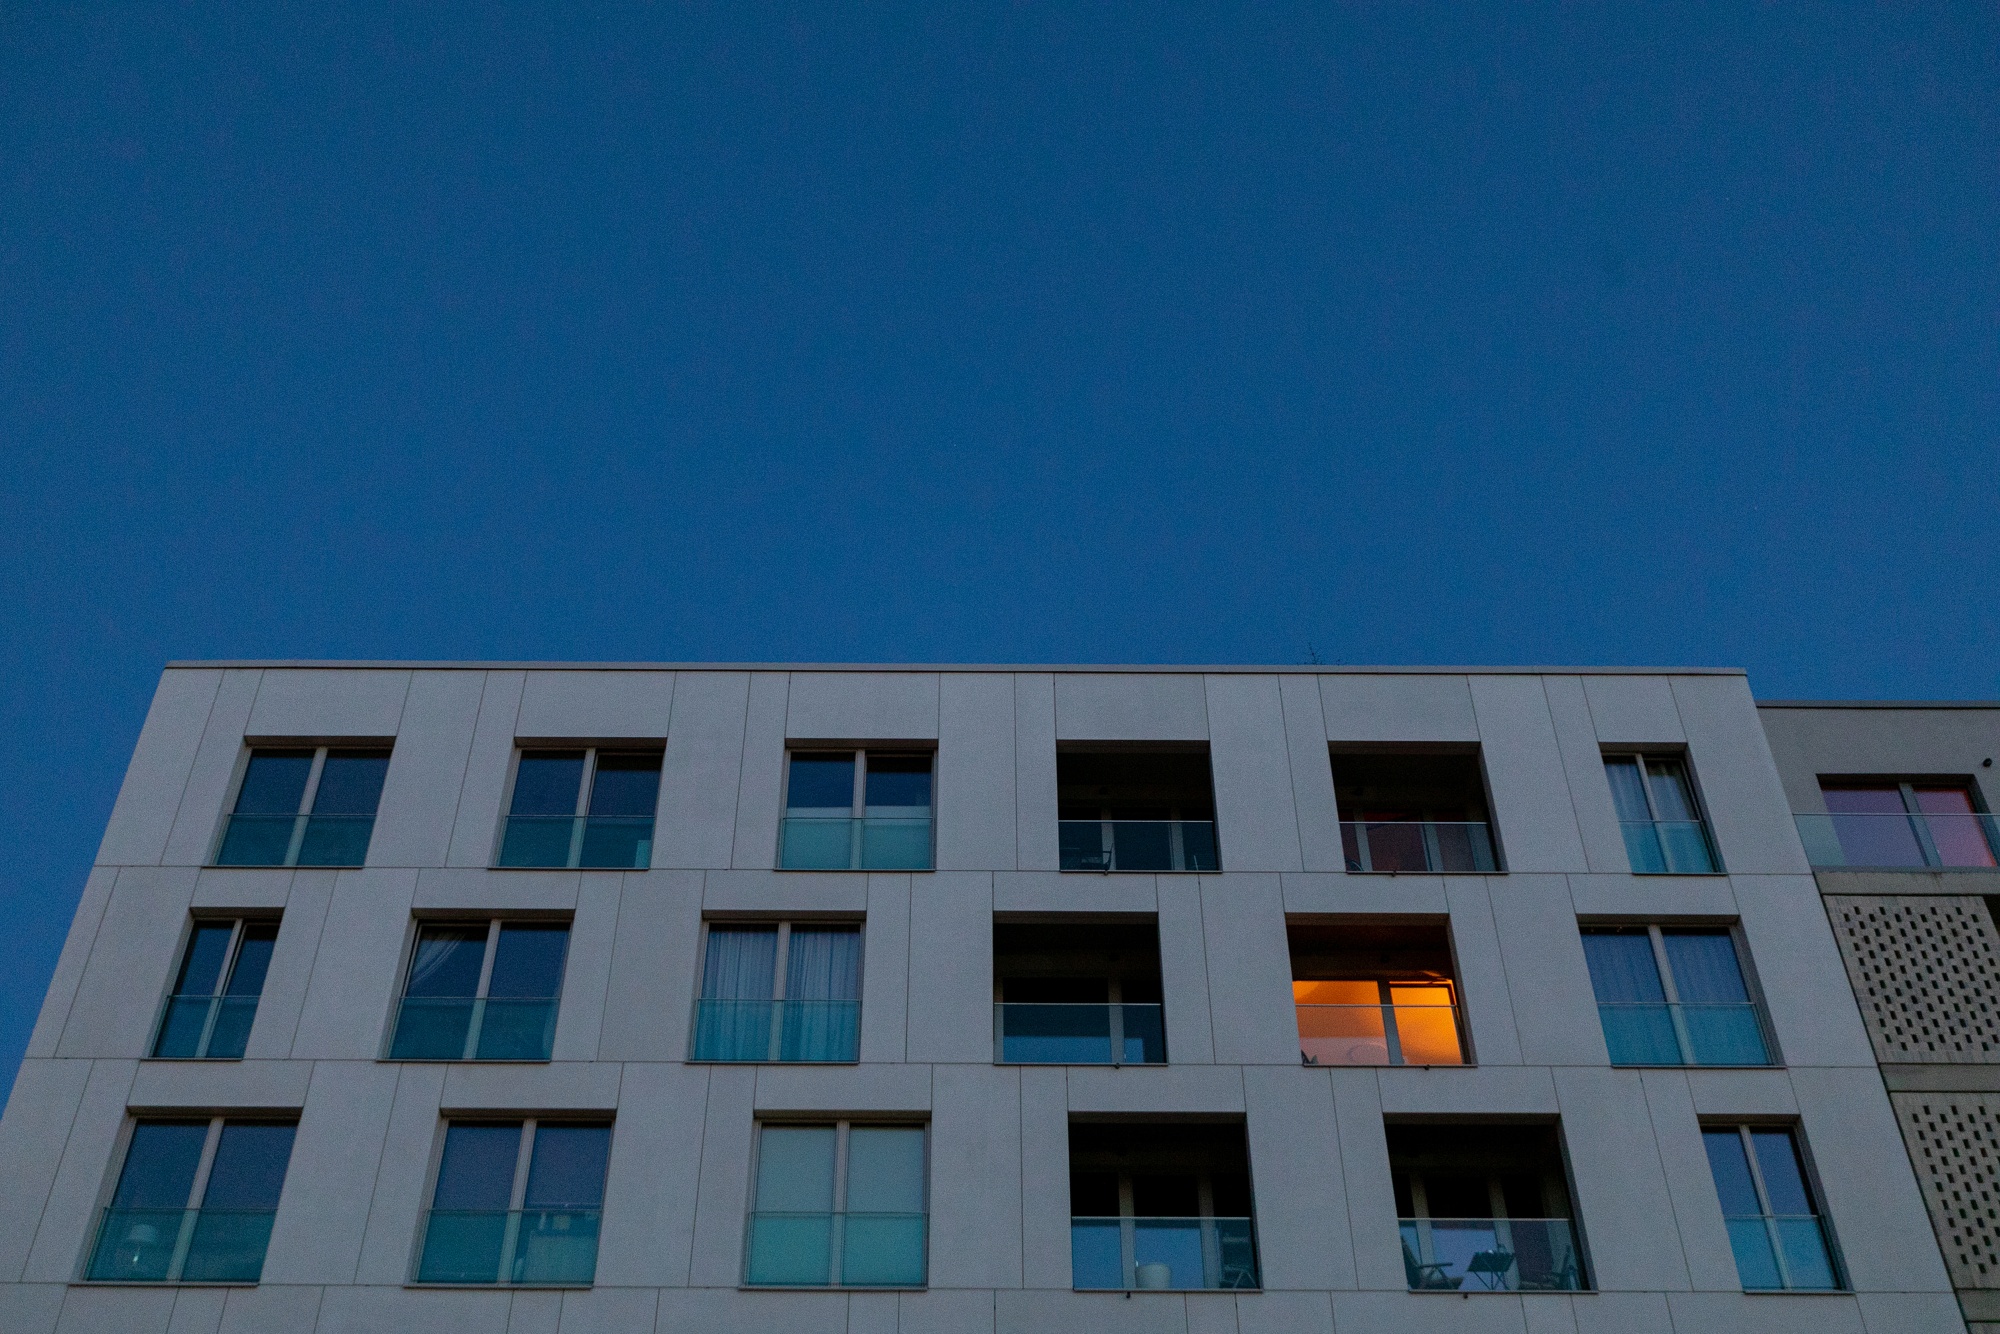 A light on in a home within a block of apartments at dusk in Berlin.